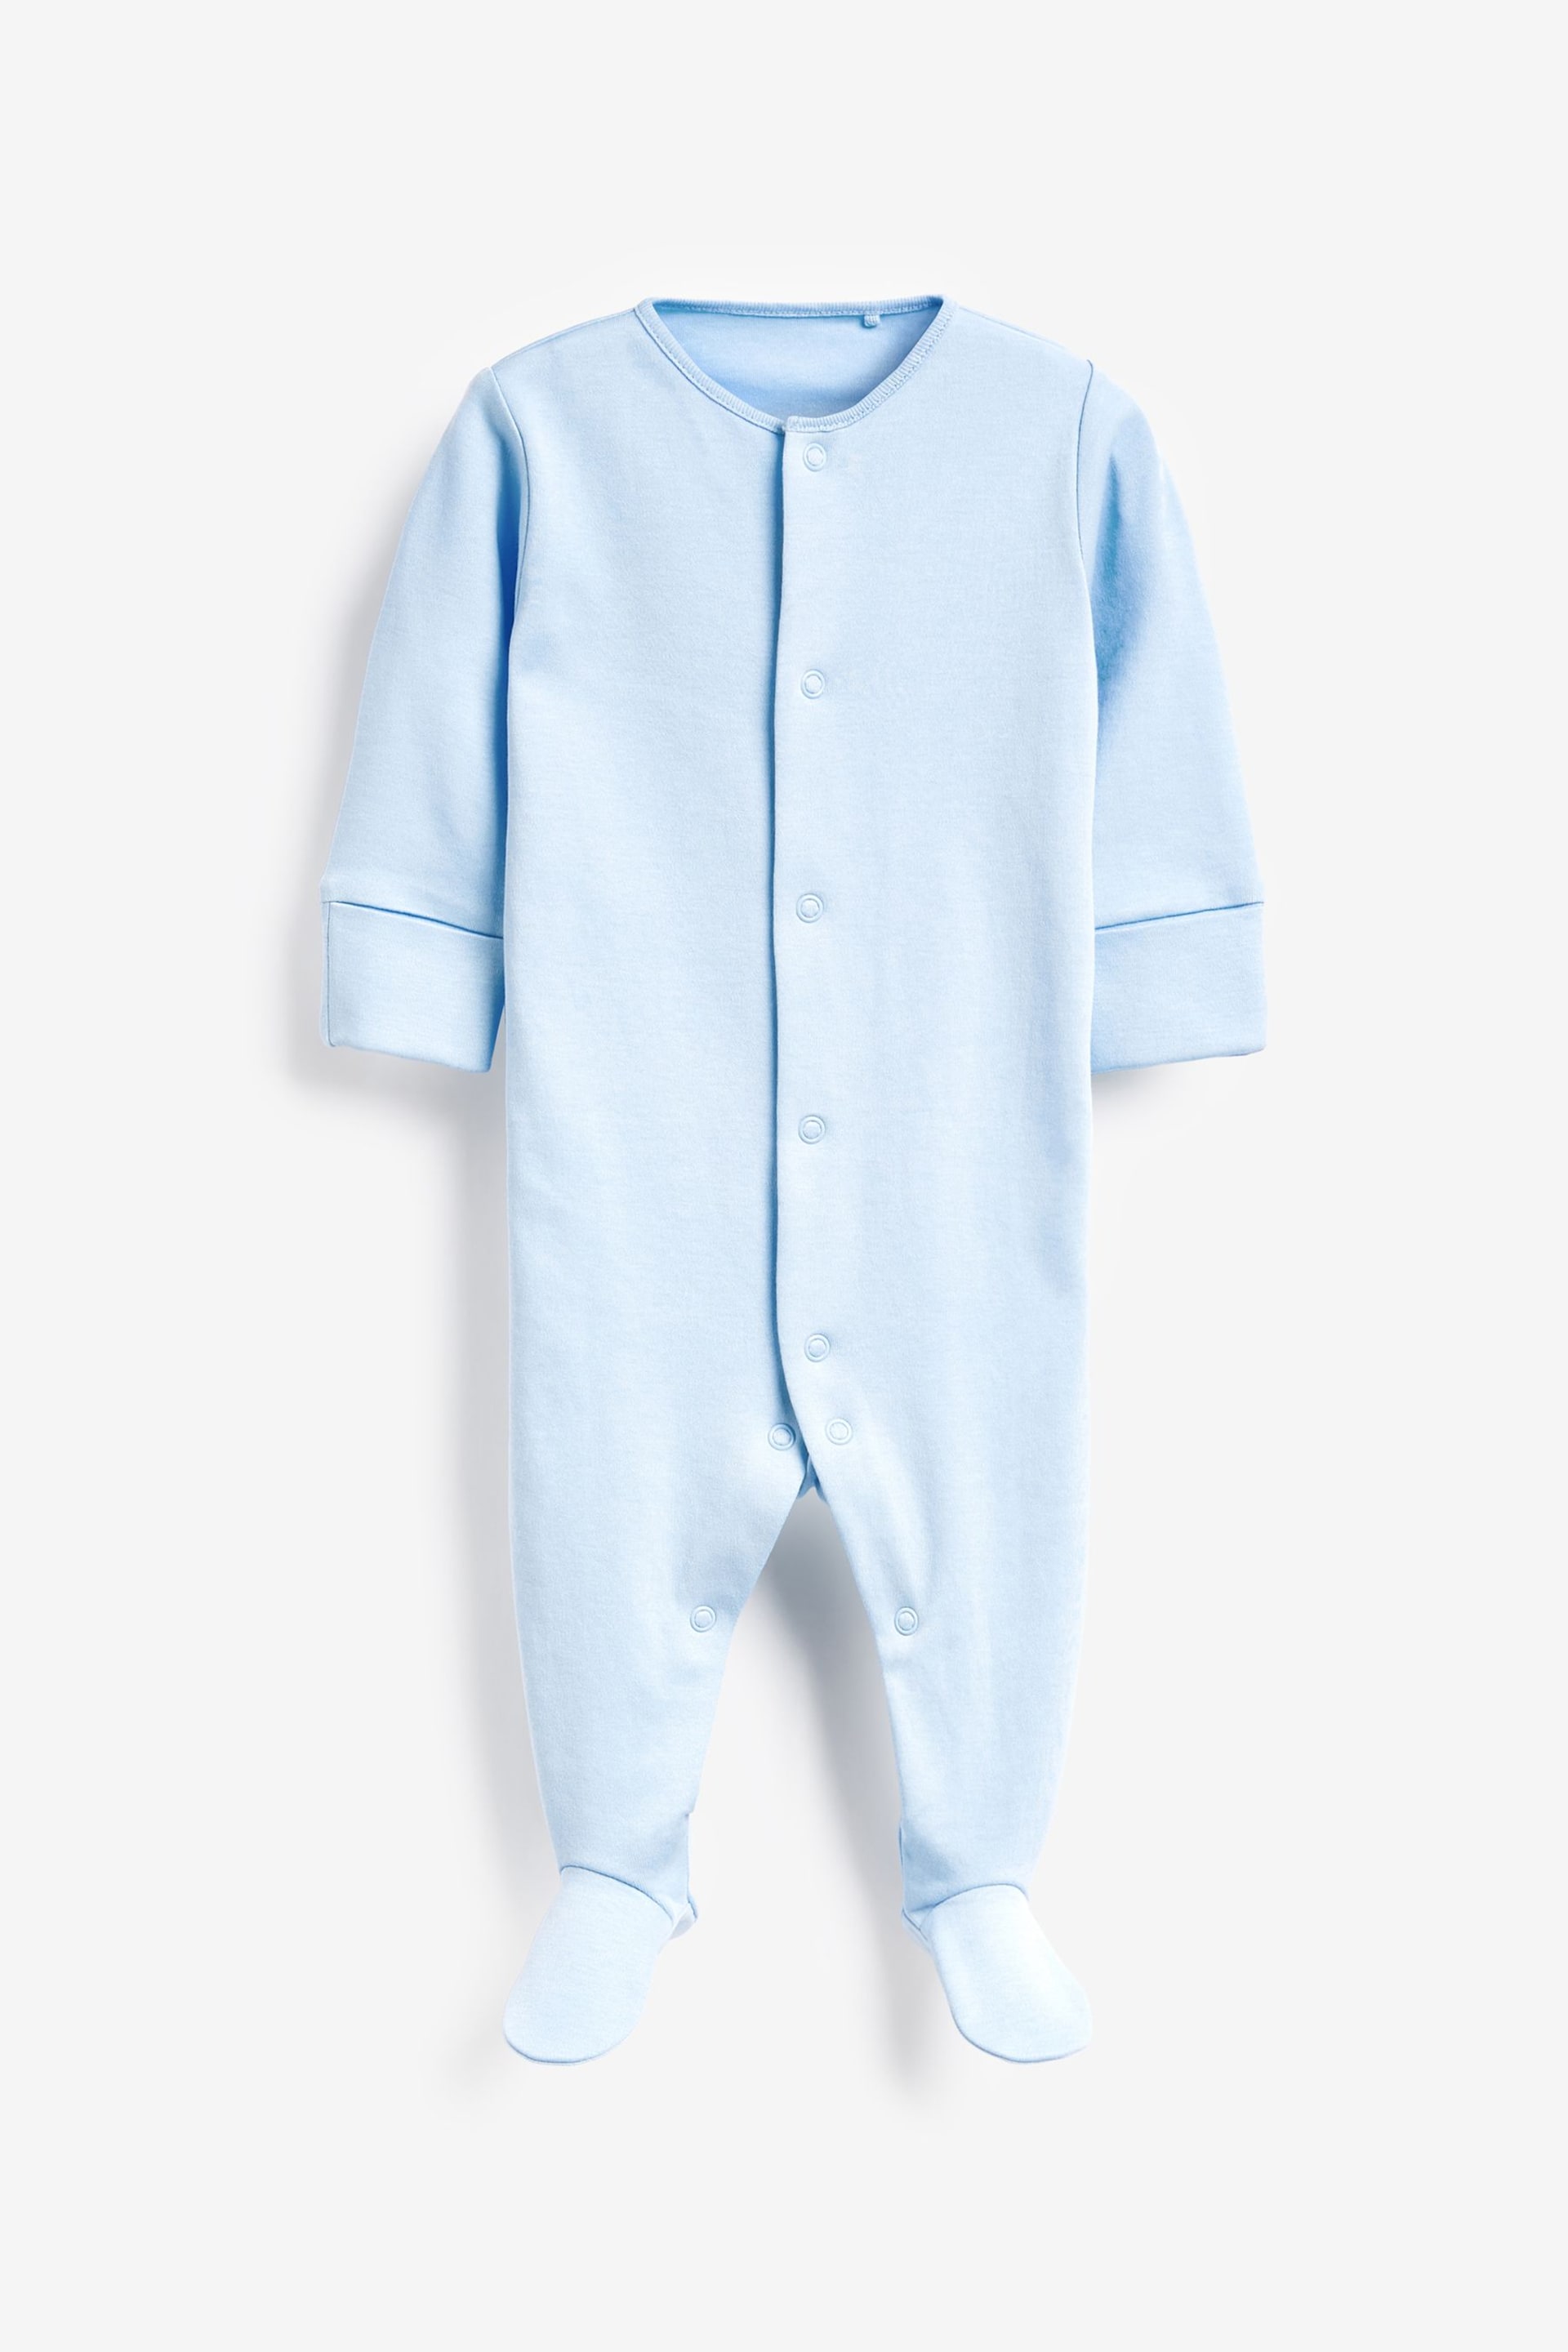 Blue/White 5 Pack Cotton Baby Sleepsuits (0-2yrs) - Image 4 of 7